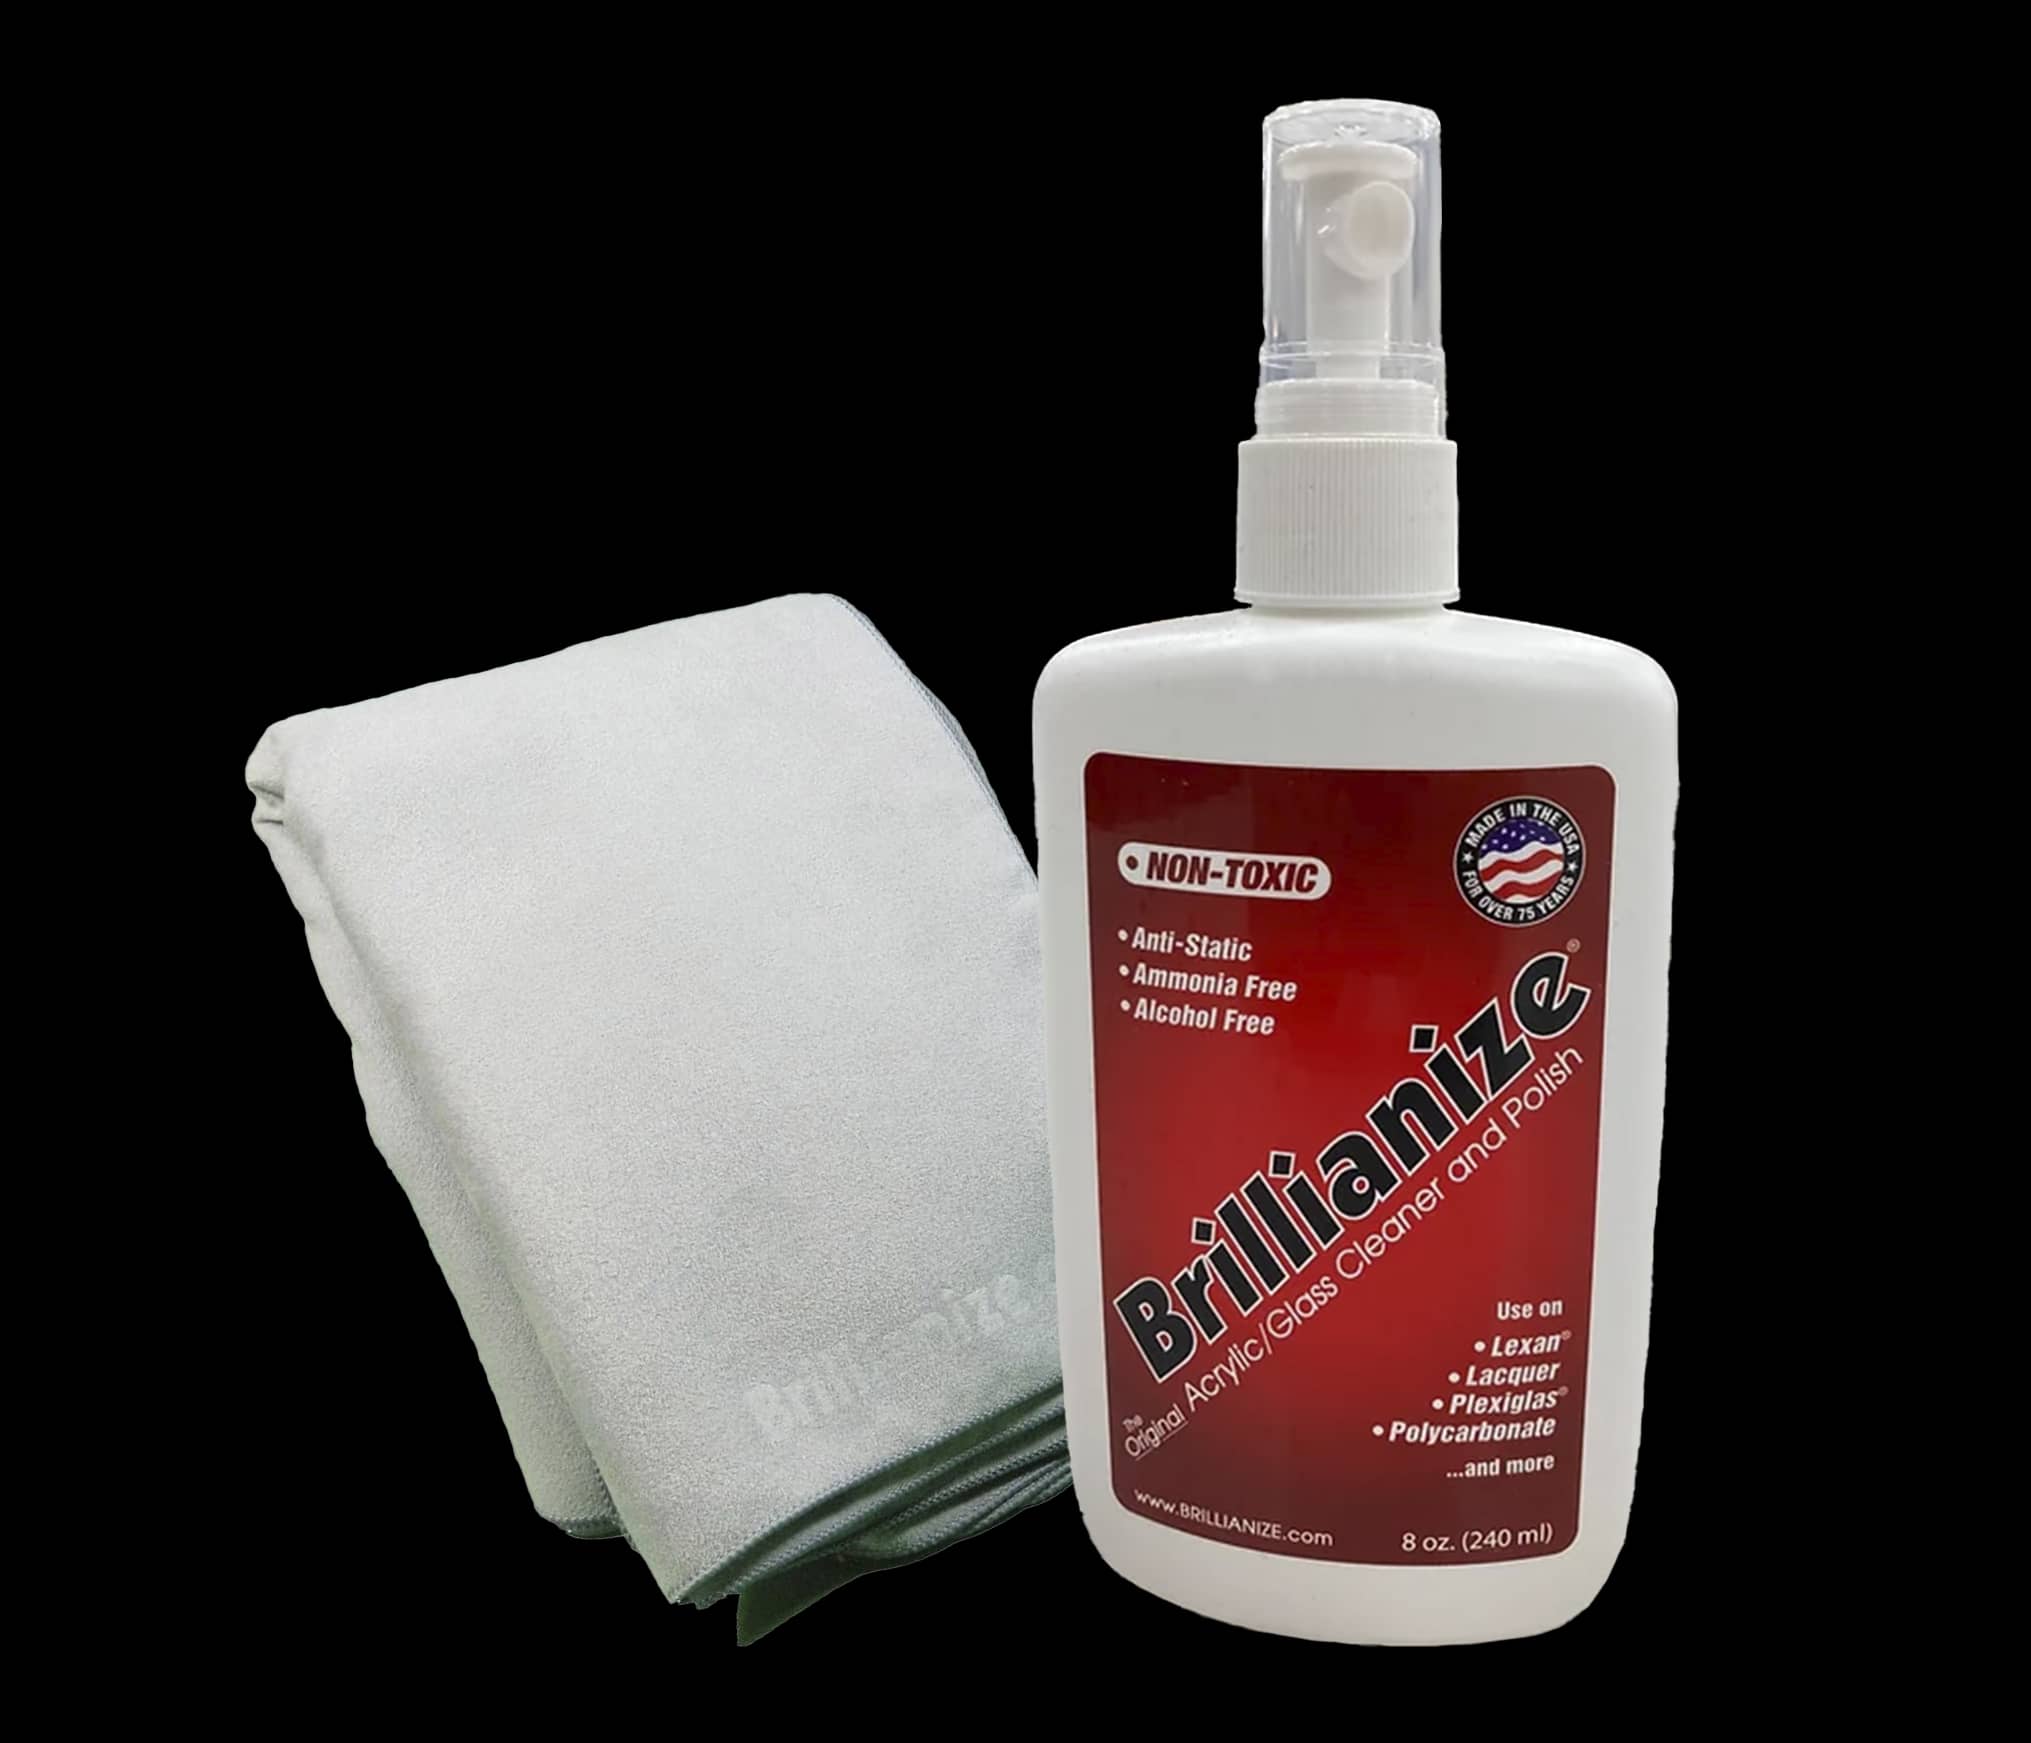 Plastic Cleaner Kit by Brillianize for polycarbonate - The